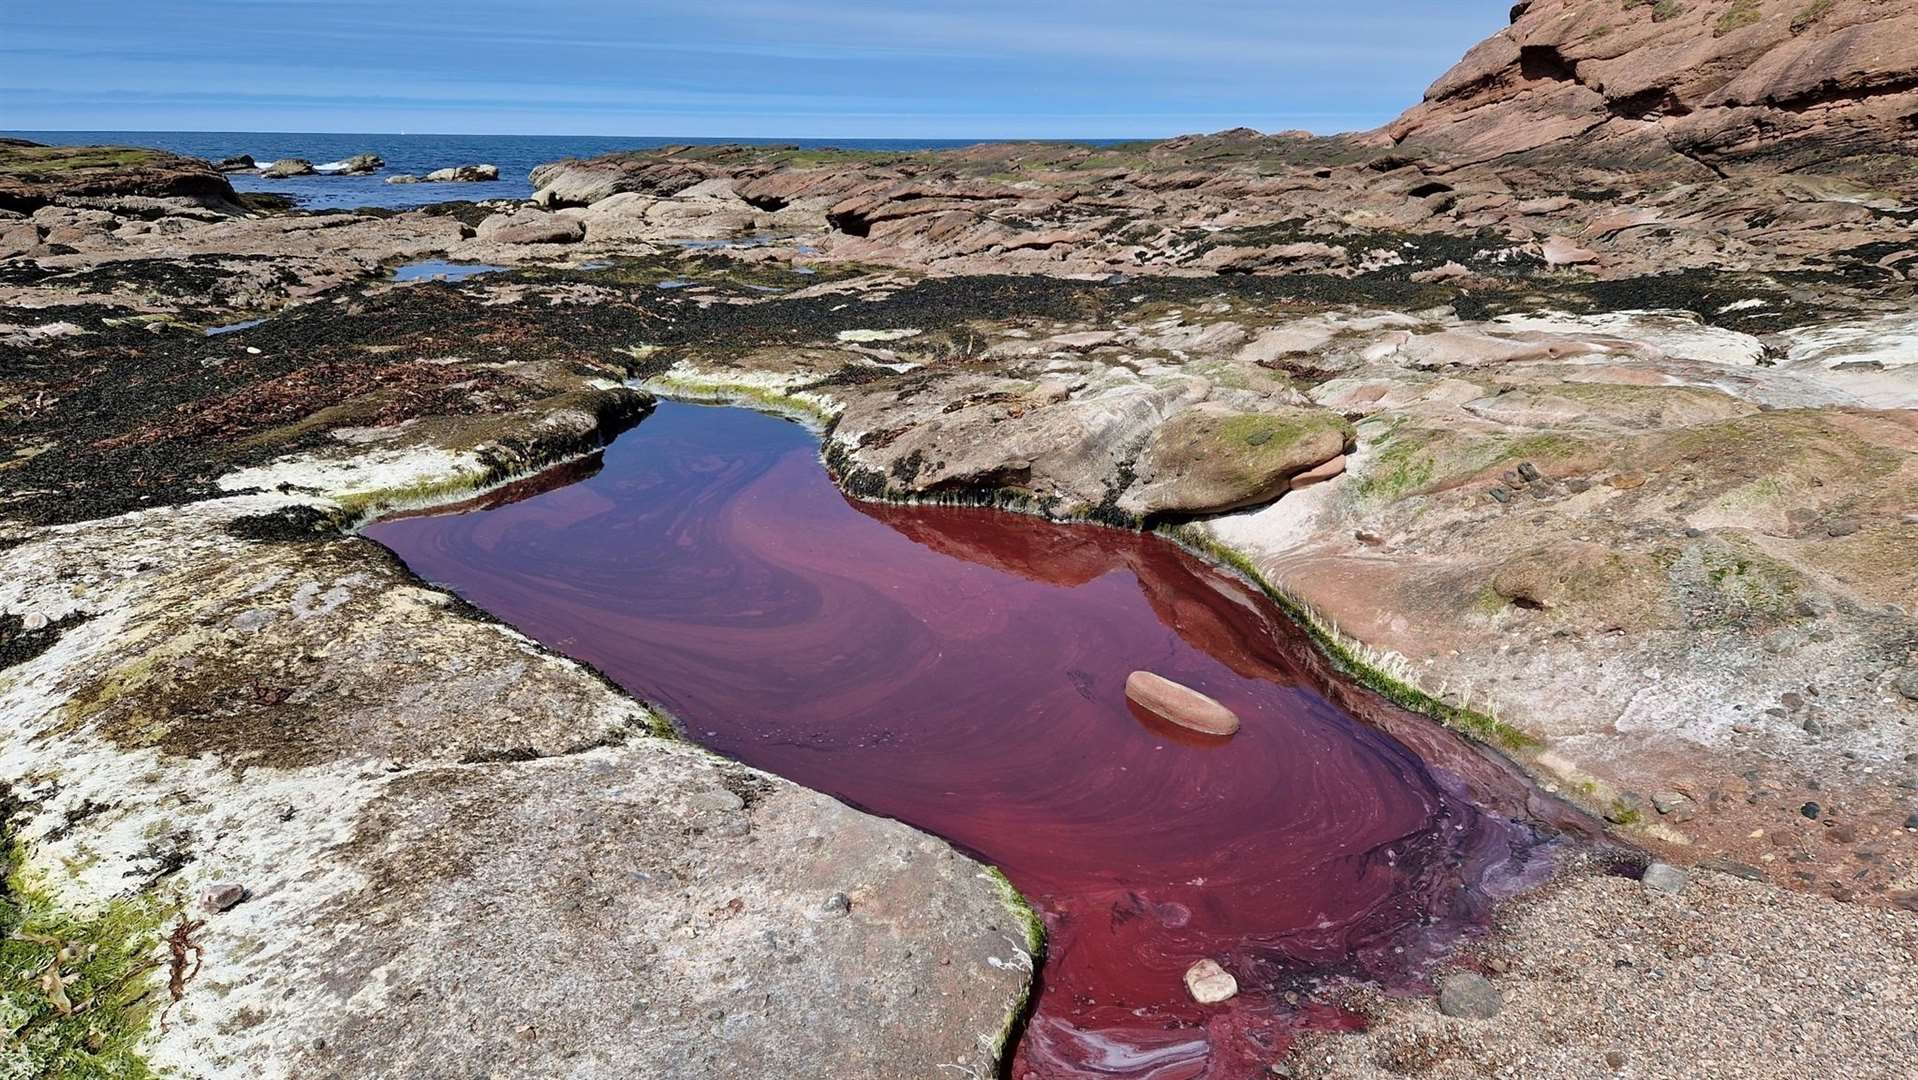 The bloom is causing red rockpools - and should be avoided